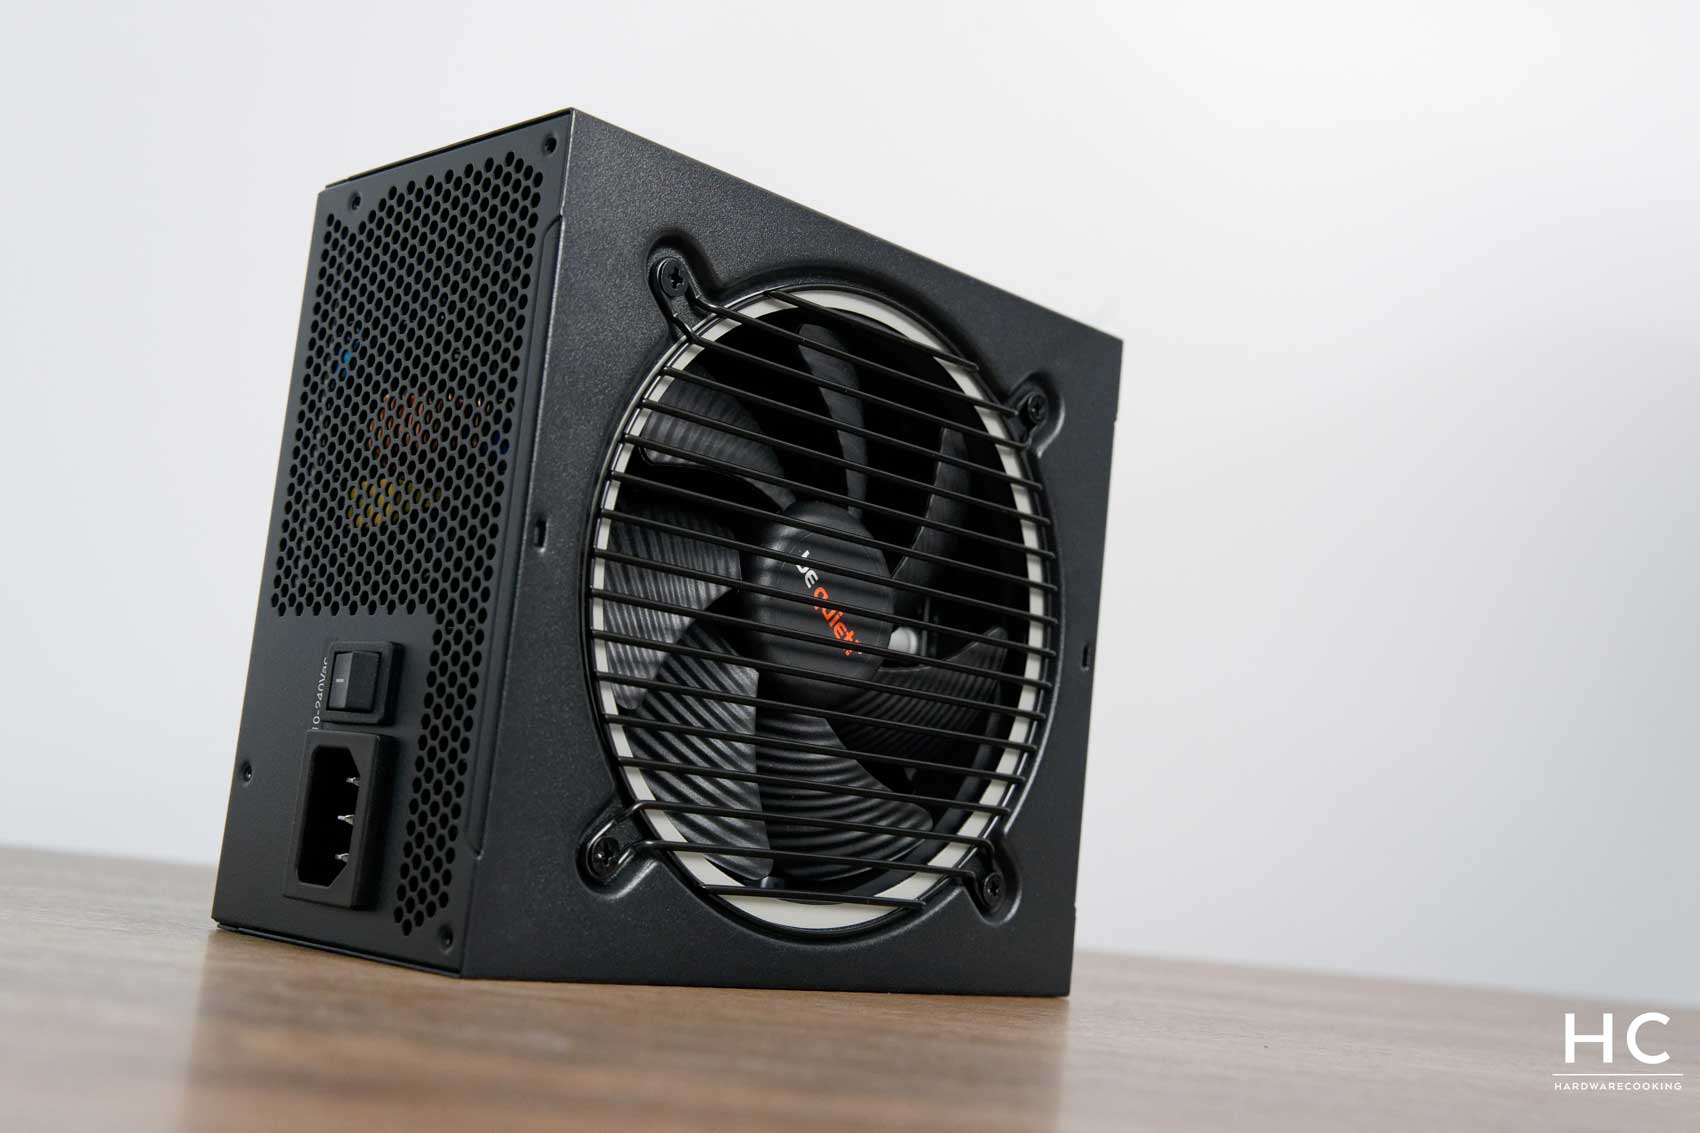 Be Quiet! System Power 10 (650W) - Alimentation Be Quiet!